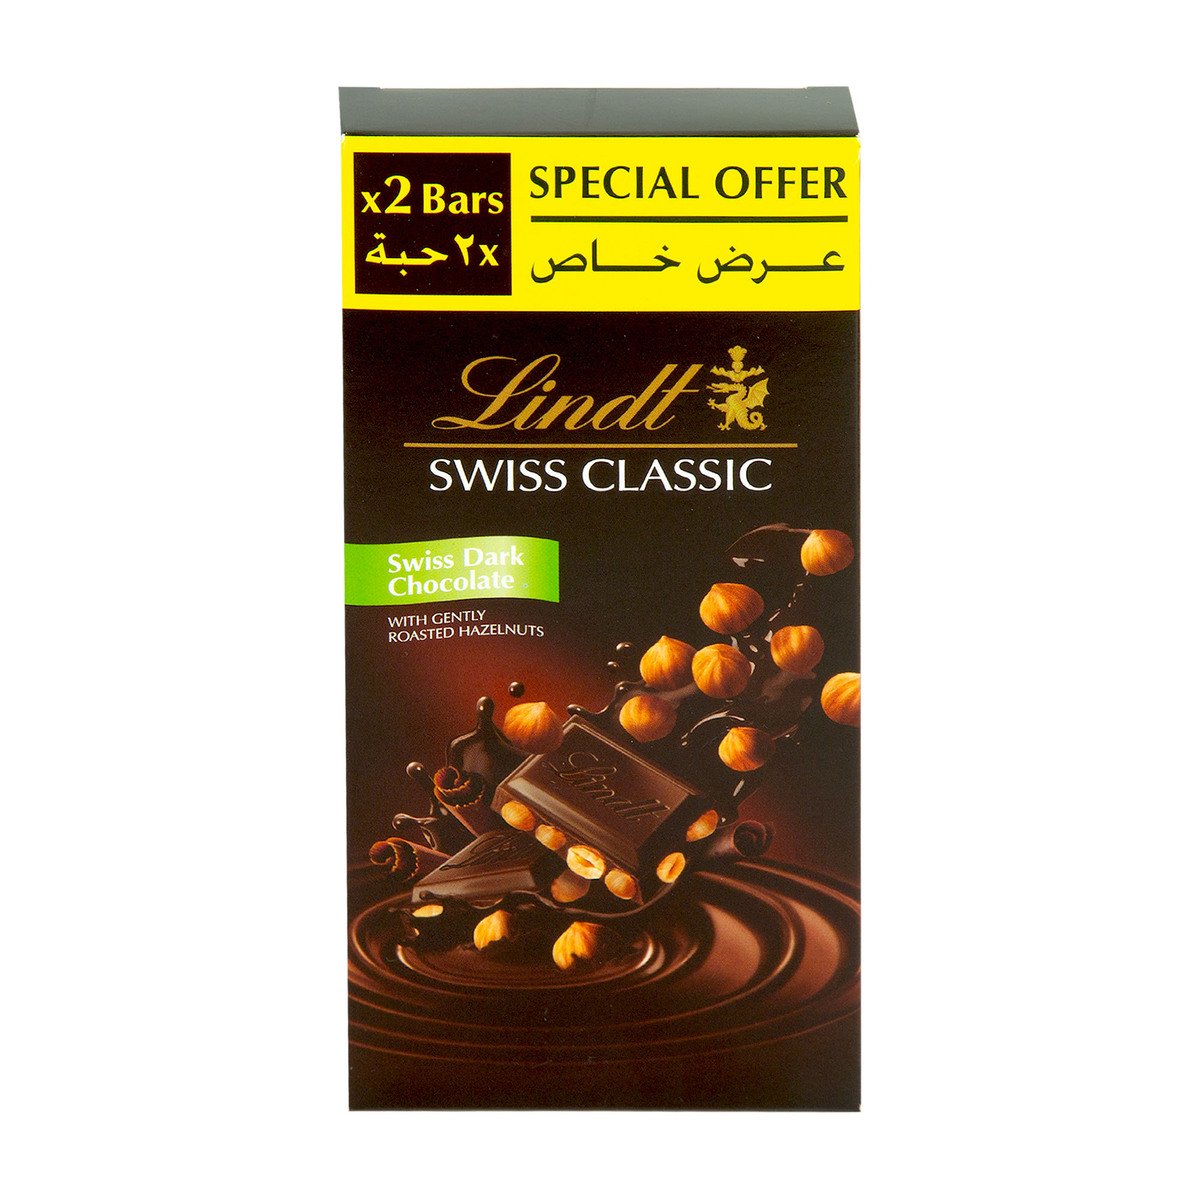 Lindt Swiss Classic Dark Chocolate Value Pack 2 X 100 G Online At Best Price Covrd Chocobars 5783